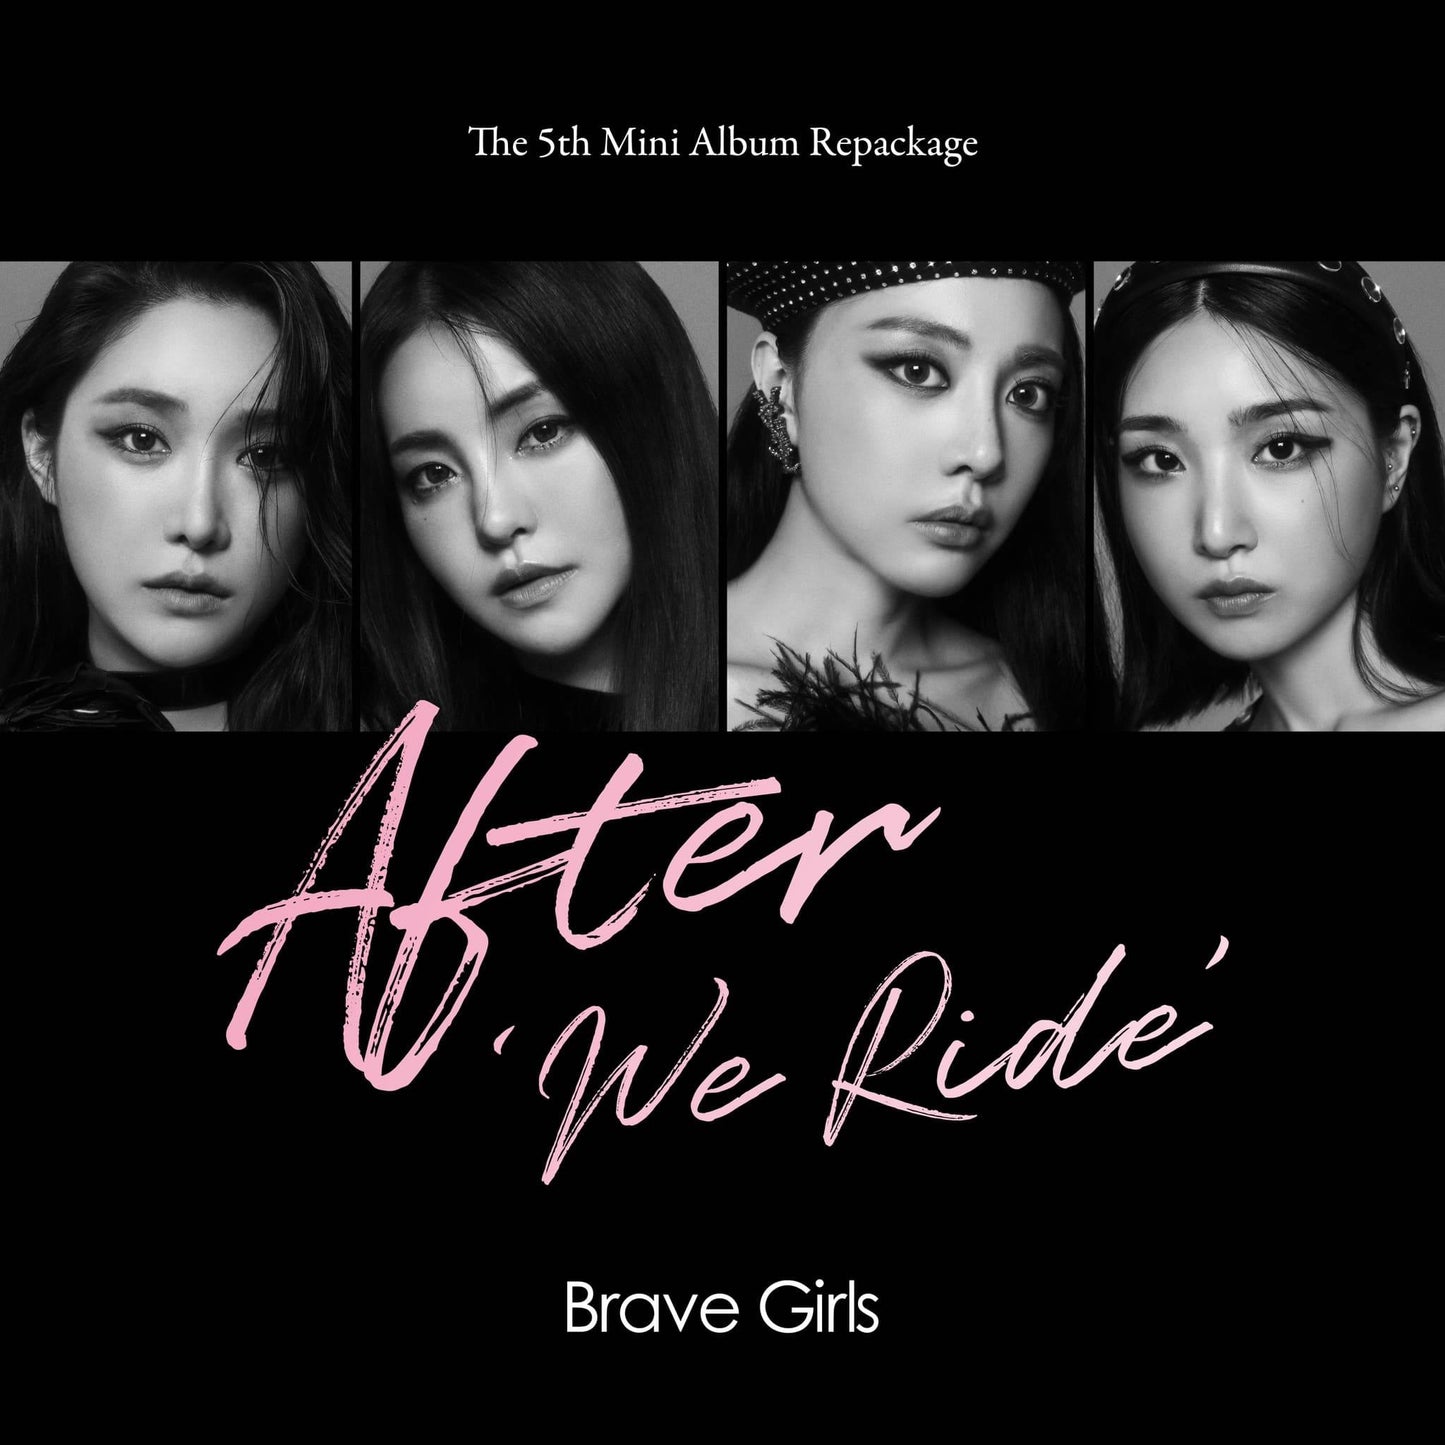 BRAVE GIRLS - AFTER 'WE RIDE' (5TH MINI ALBUM REPACKAGE) - J-Store Online